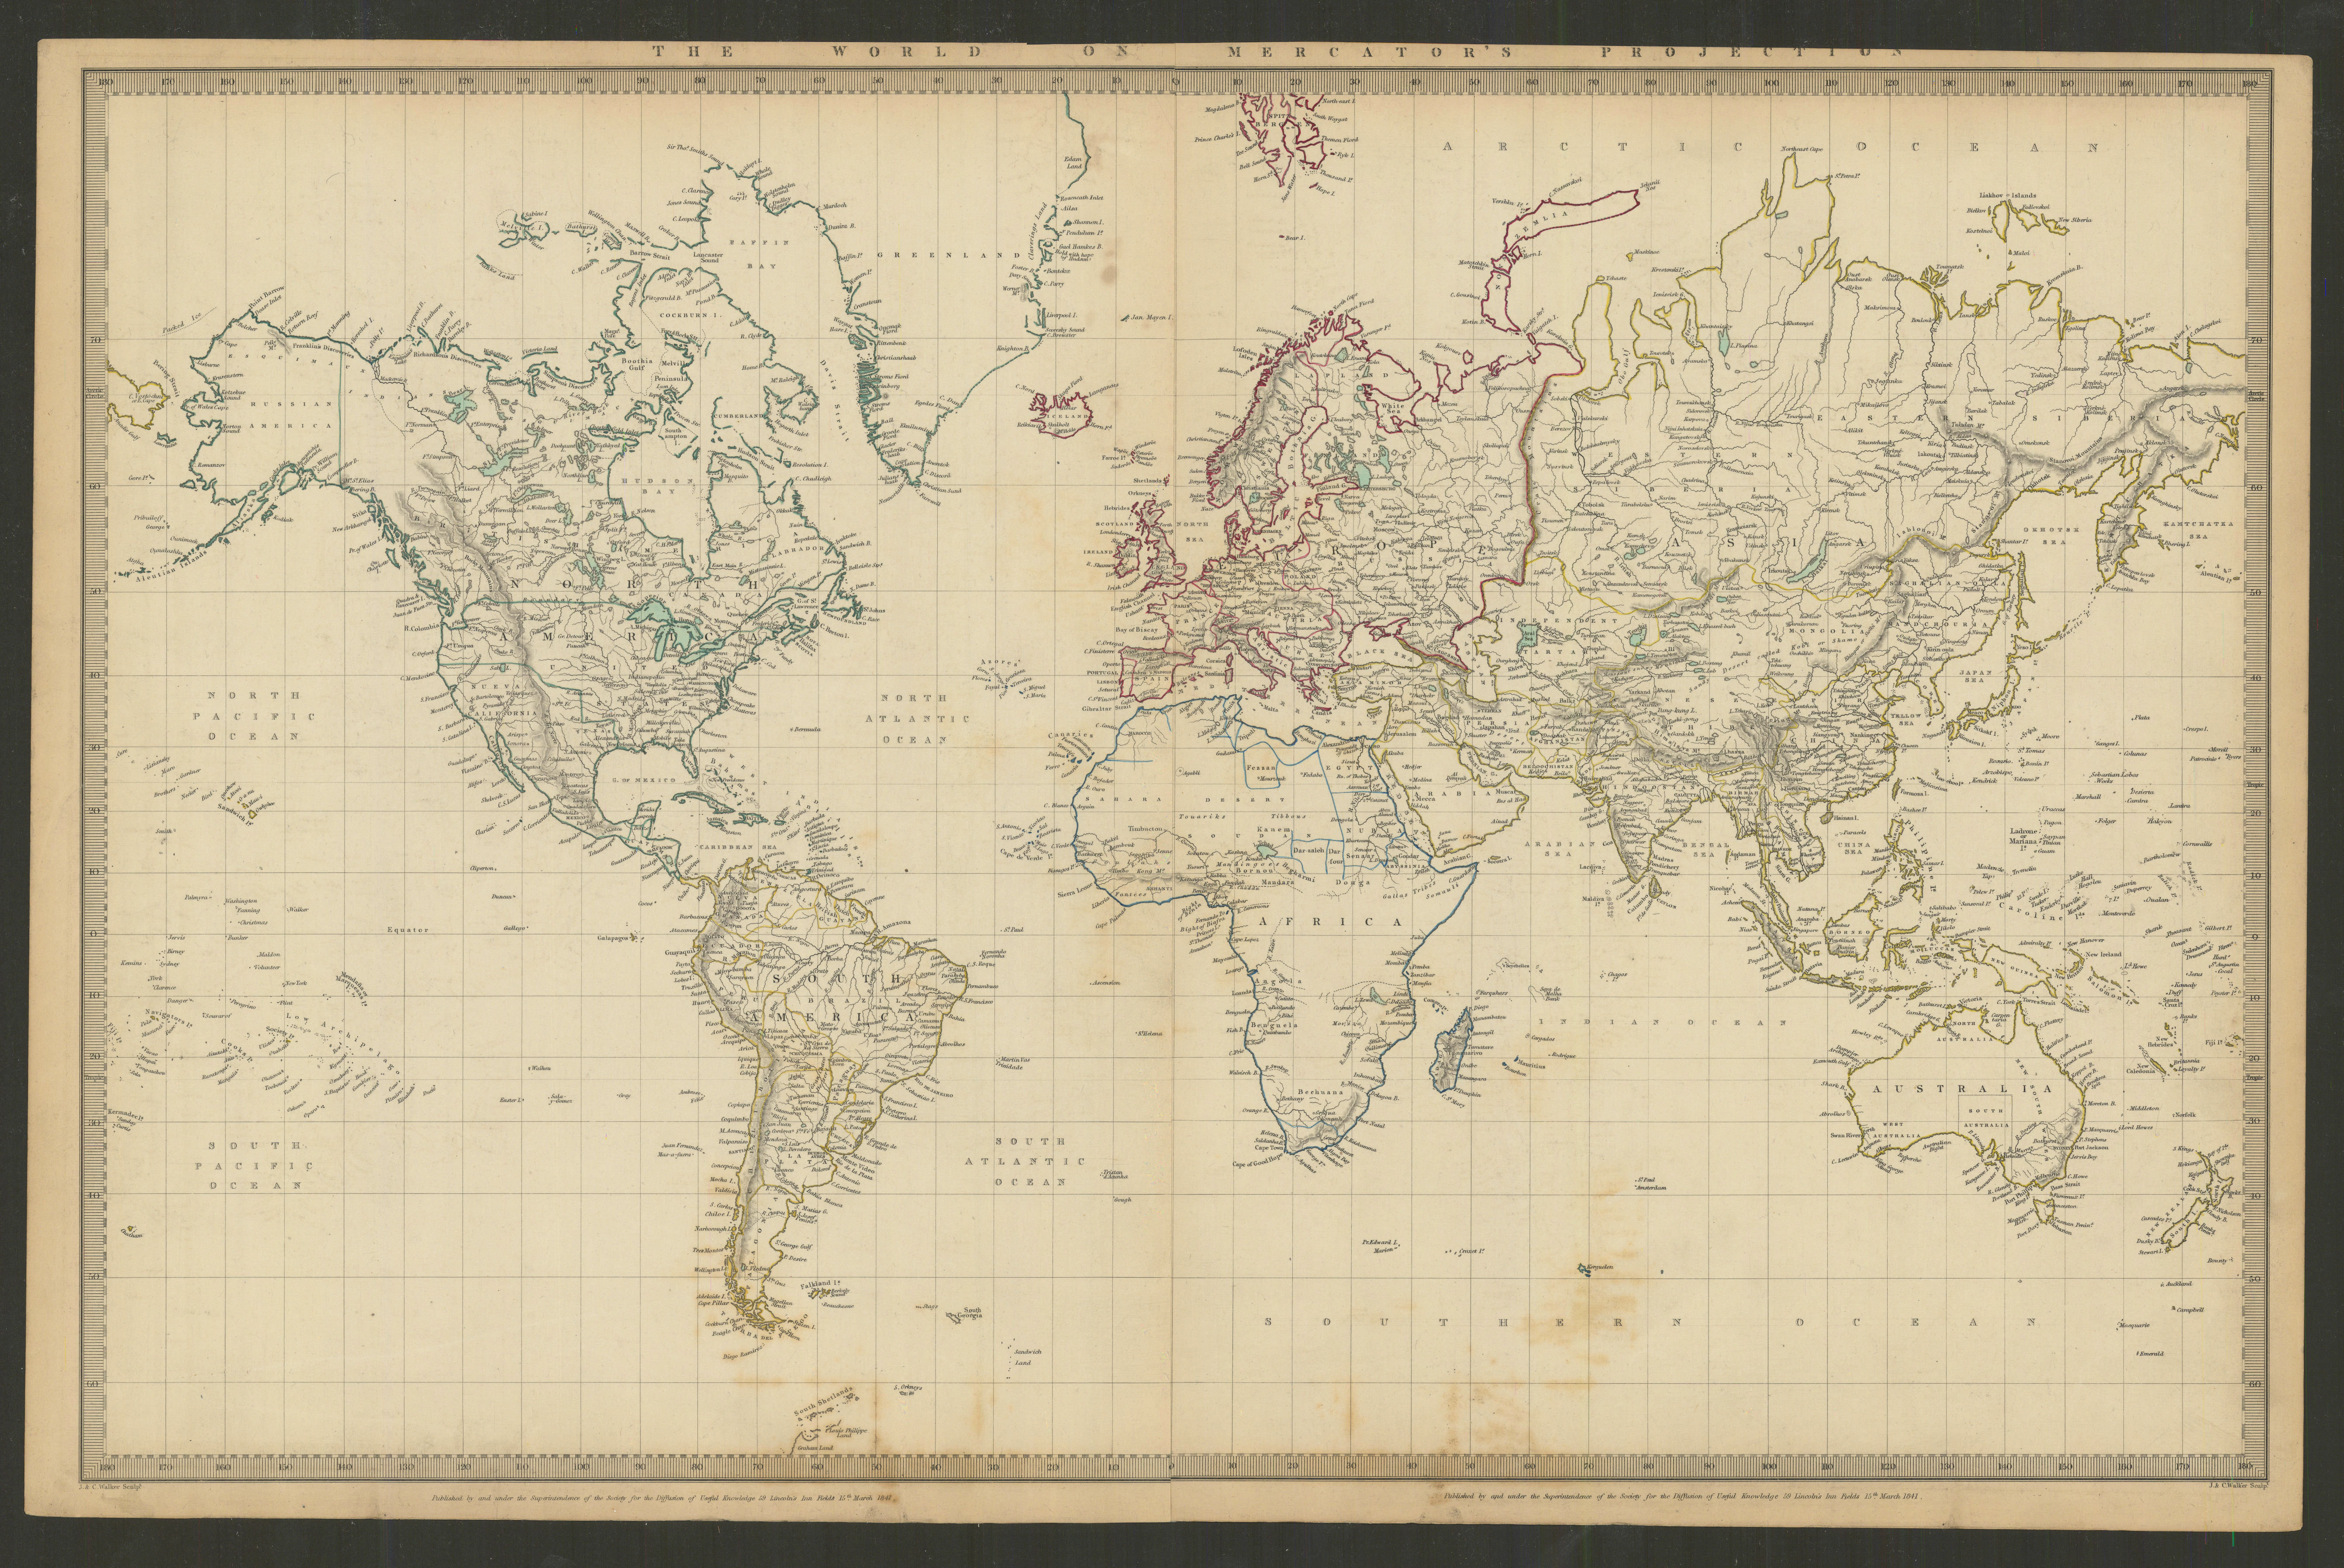 Associate Product WORLD ON MERCATOR'S PROJECTION. Pre-Mexican-American war. SDUK 1844 old map